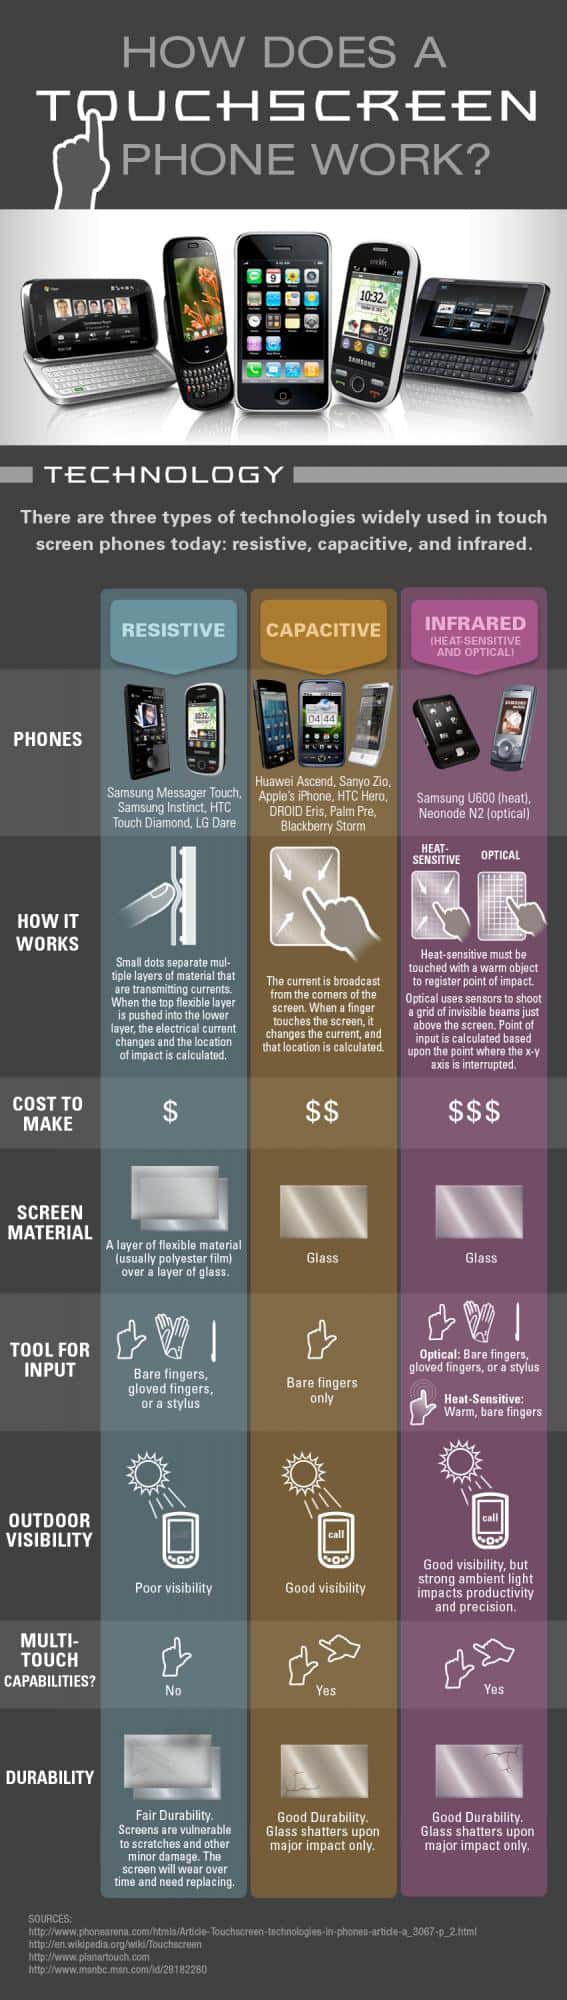 how a touchscreen phone works